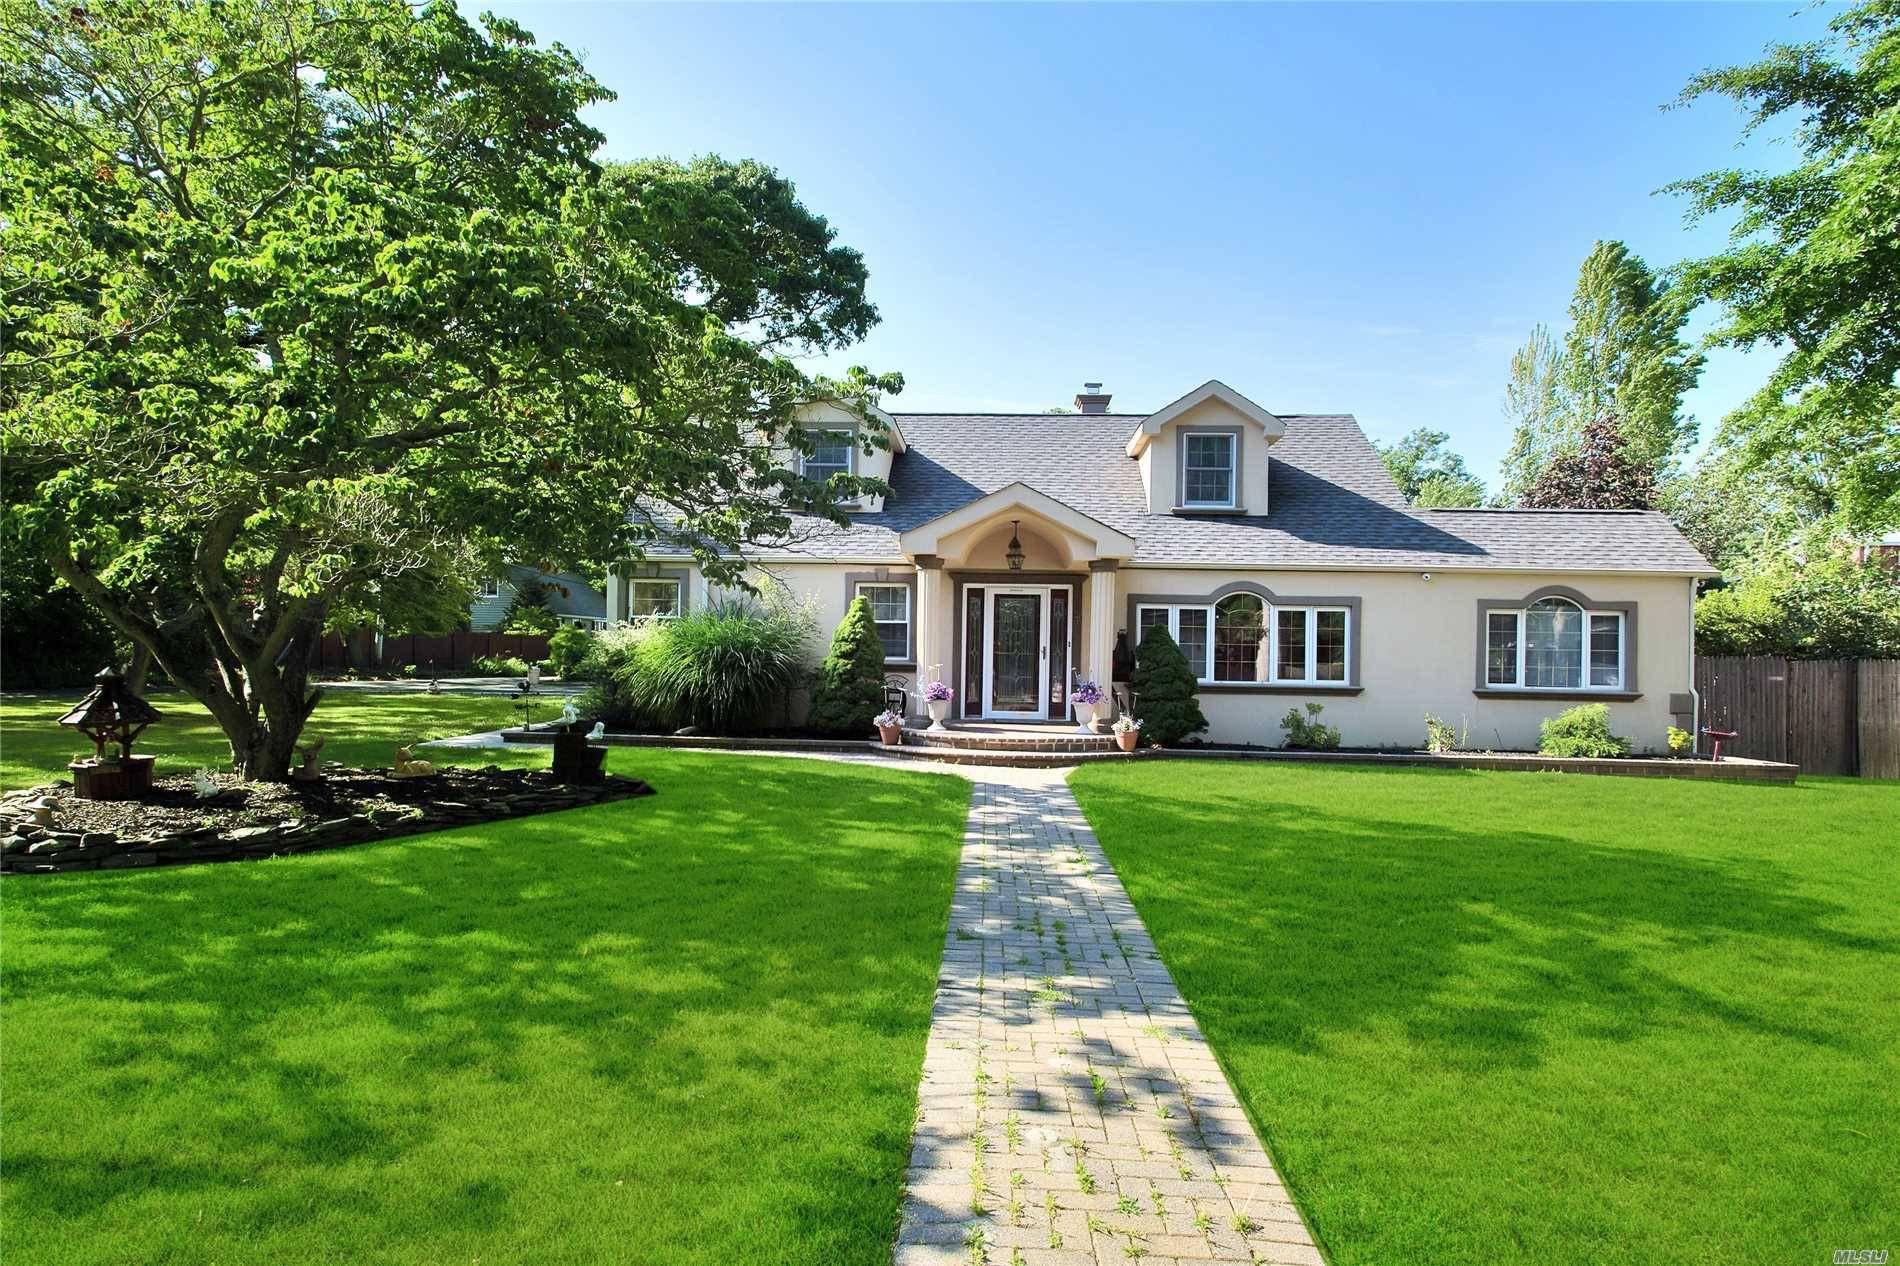 Charming Meditarannean Style Expanded Cape On Private Tree Lined Street South Of Montauk Hwy In East Islip.